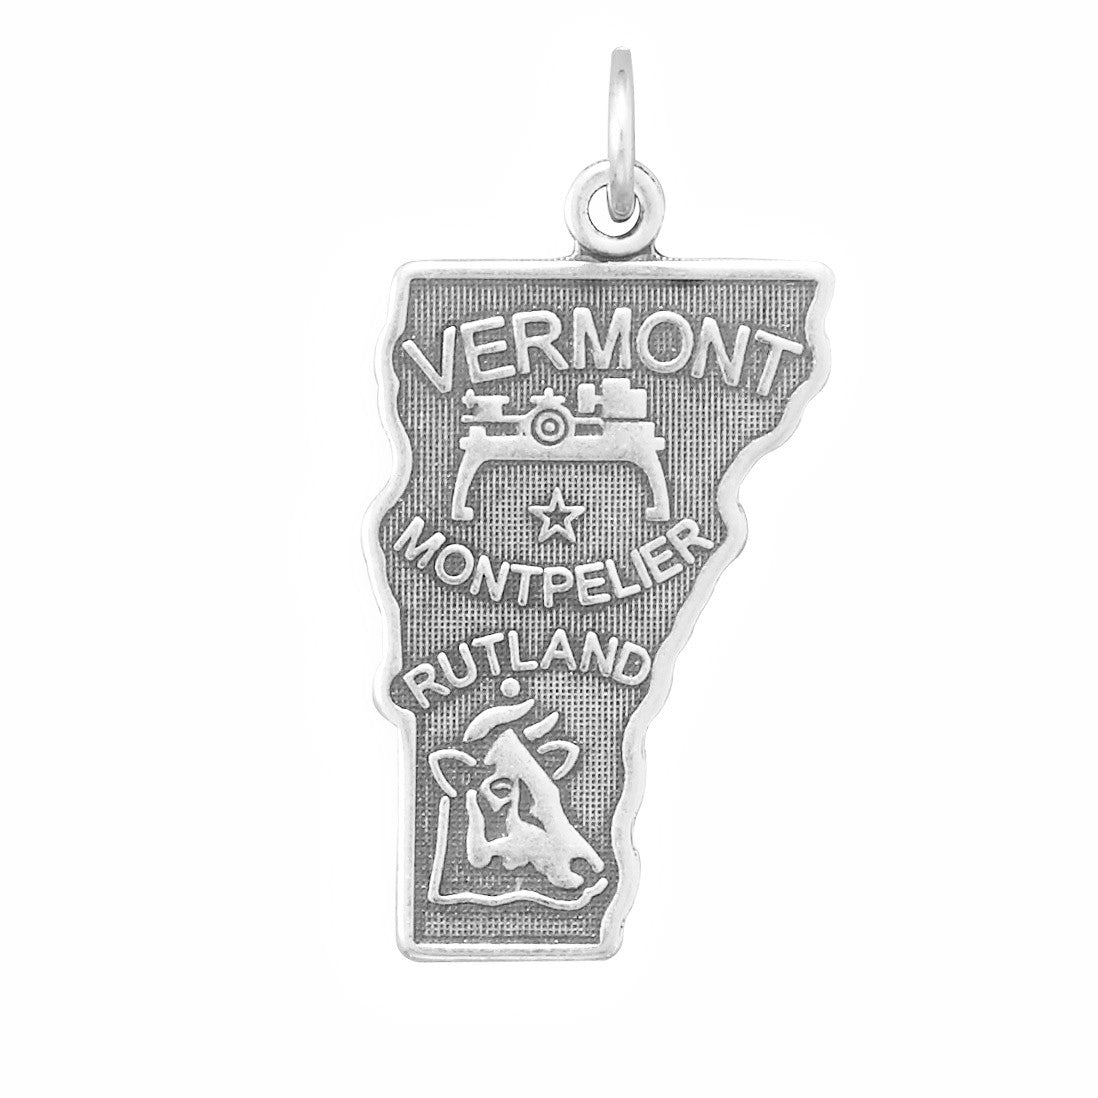 Oxidized Sterling Silver Vermont State Charm, Made in USA